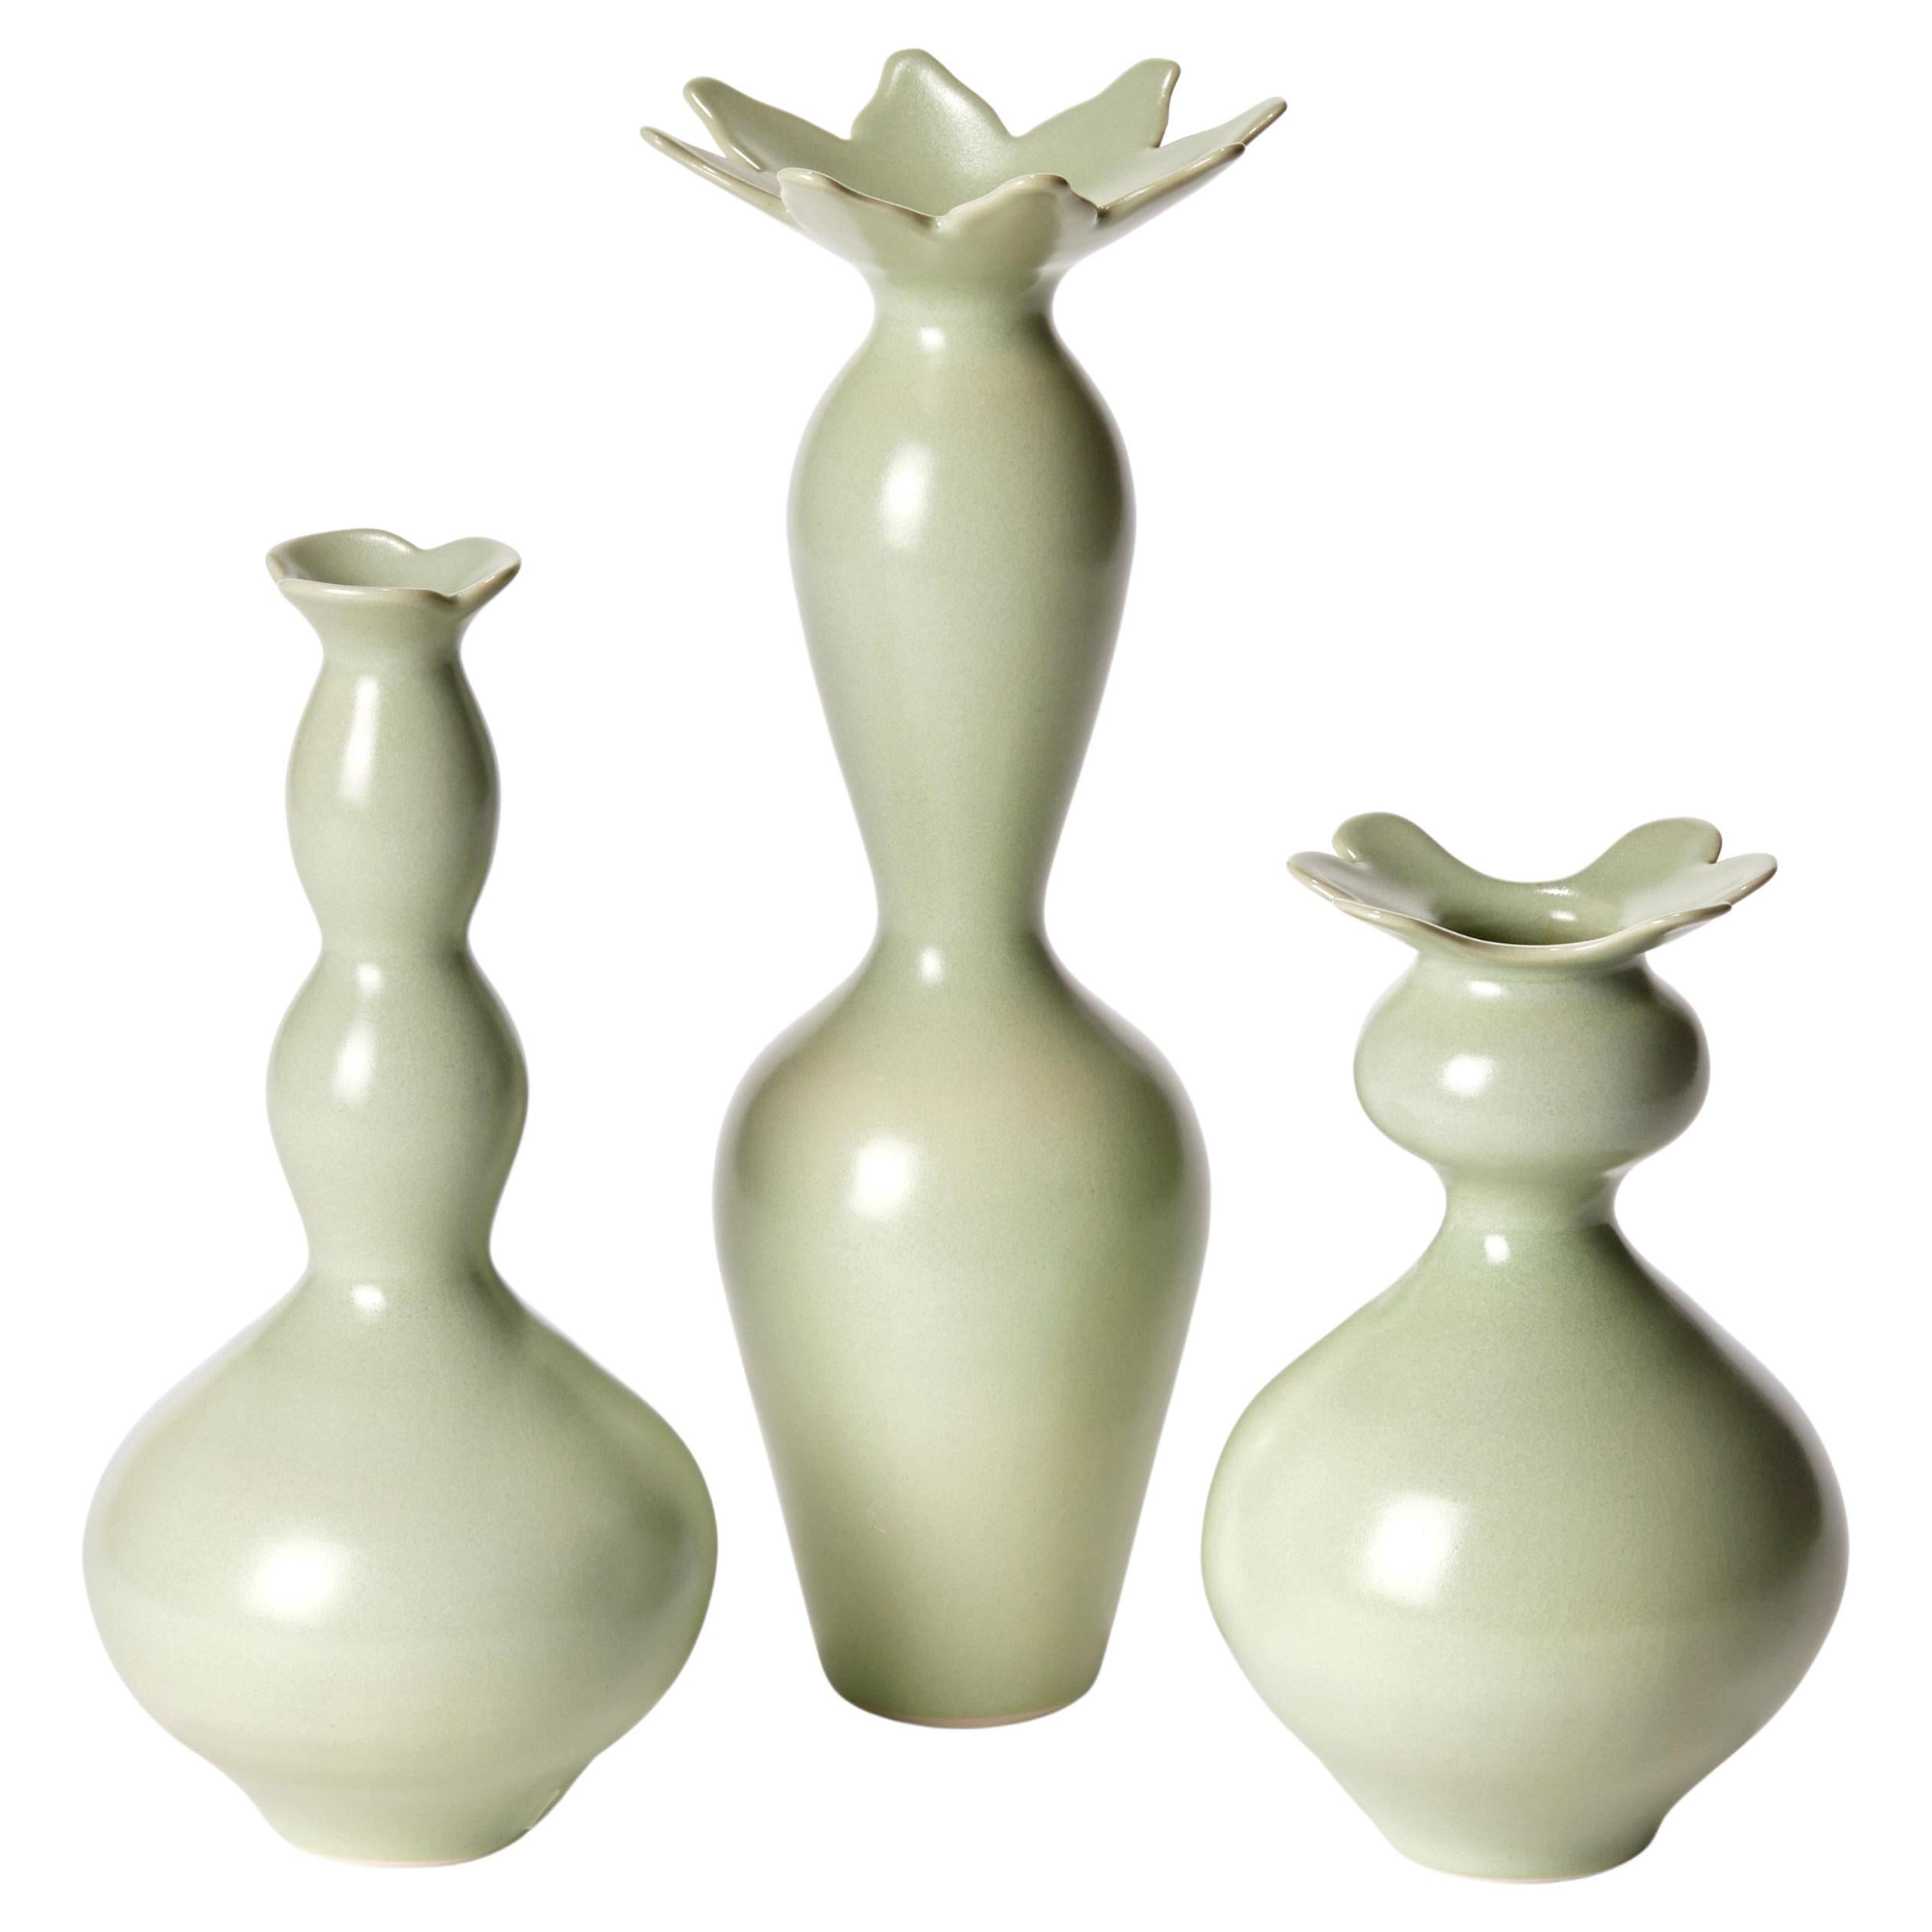 Cactus Trio, still life of three green thrown porcelain vases by Vivienne Foley